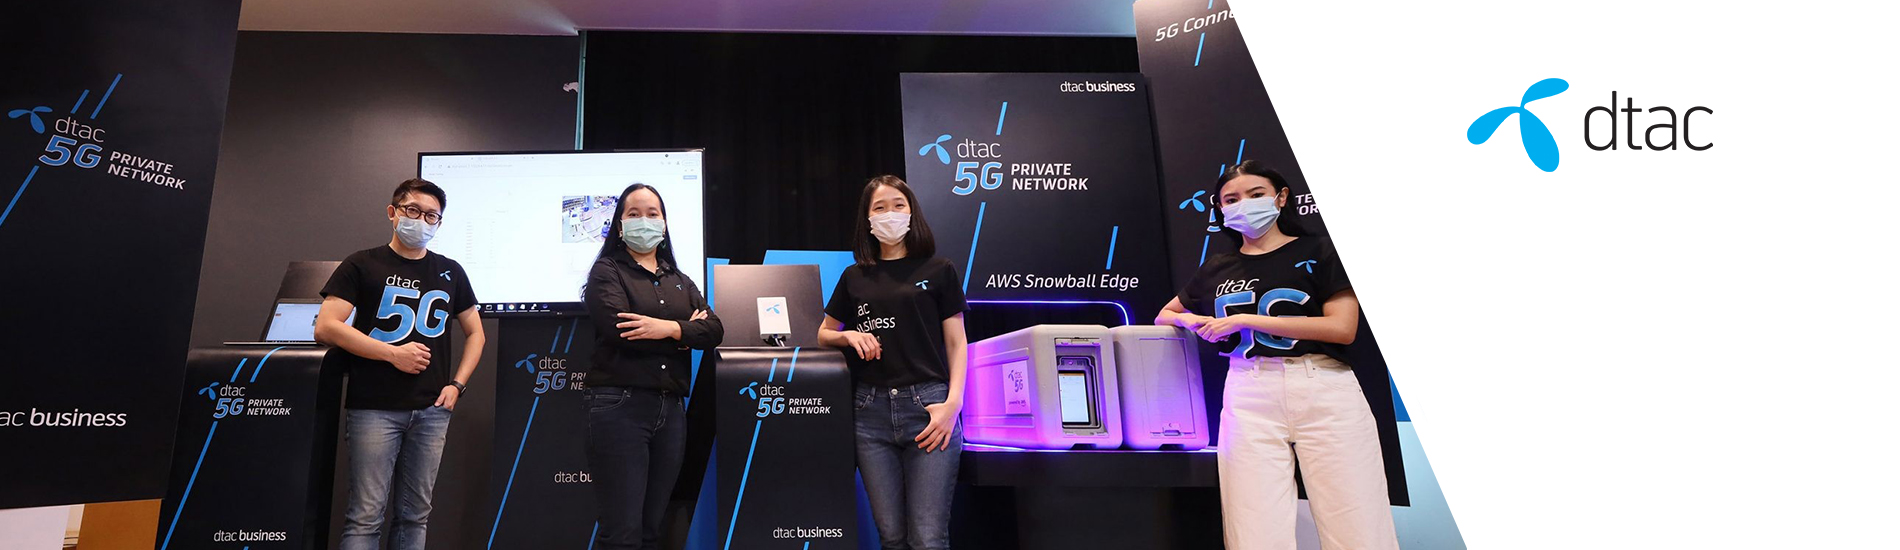 dtac Launches Proof-of-Concept 5G Private Network to Boost Thai Industry